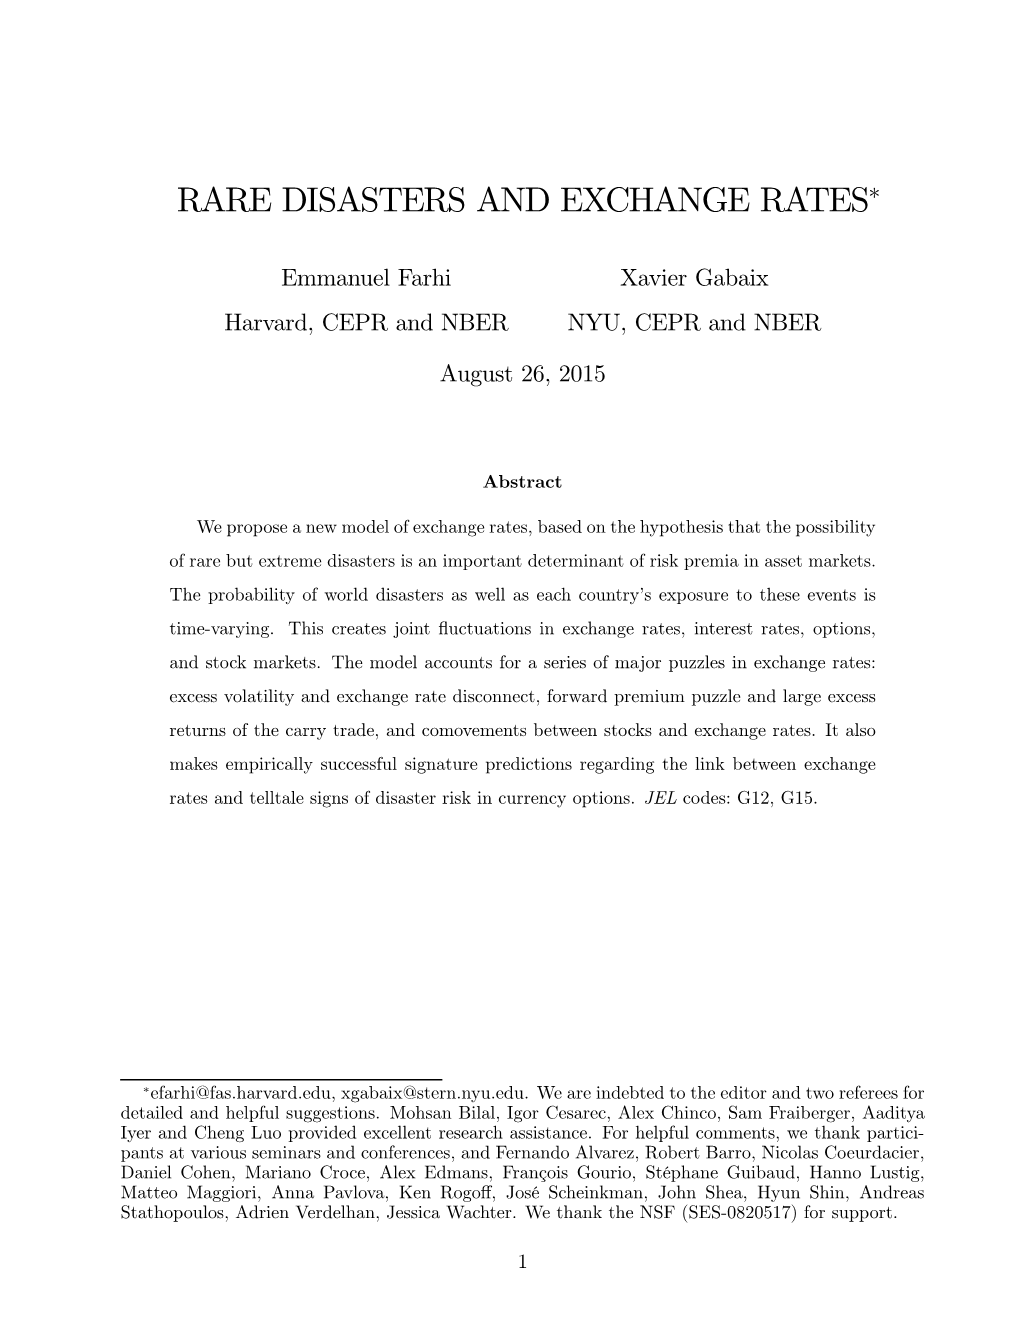 Rare Disasters and Exchange Rates∗